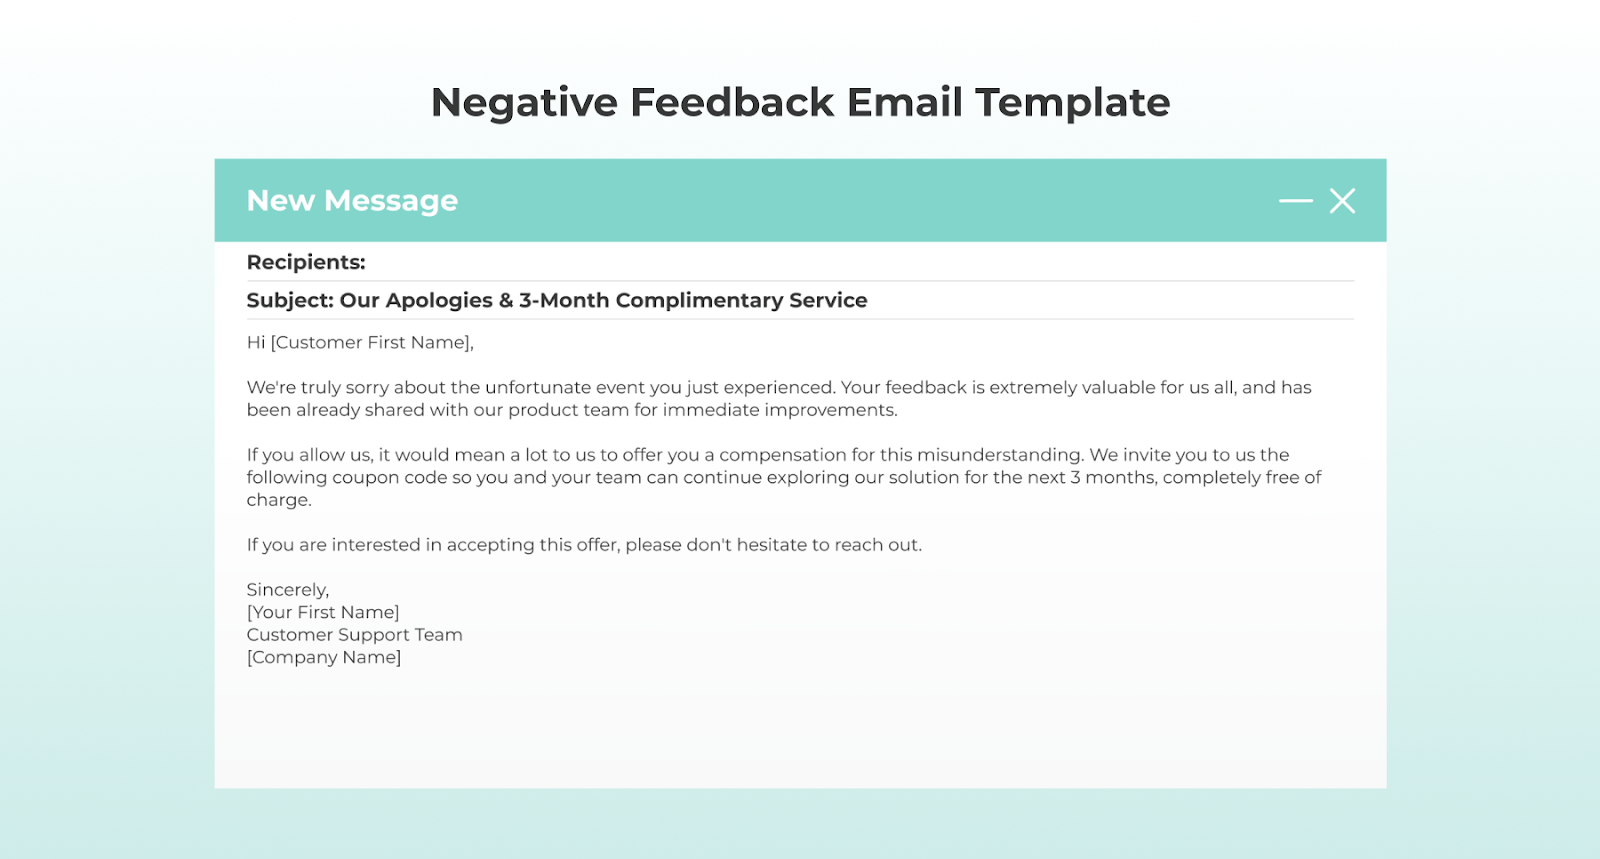 Writing Customer Support Emails: Negative Feedback Email Template